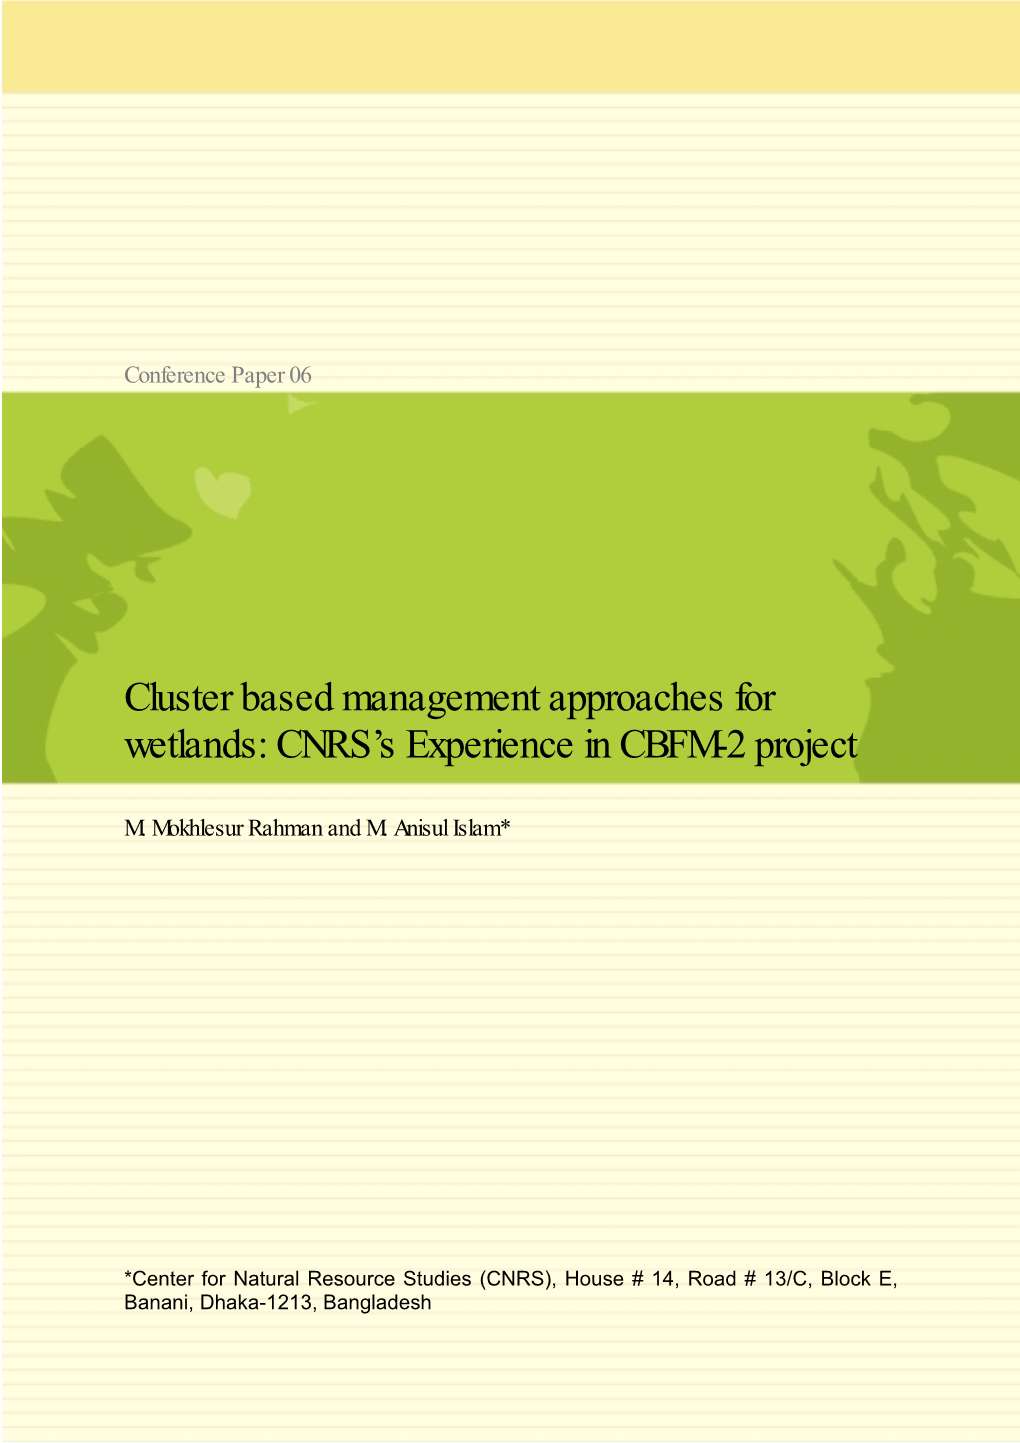 Cluster Based Management Approaches for Wetlands: CNRS’S Experience in CBFM-2 Project